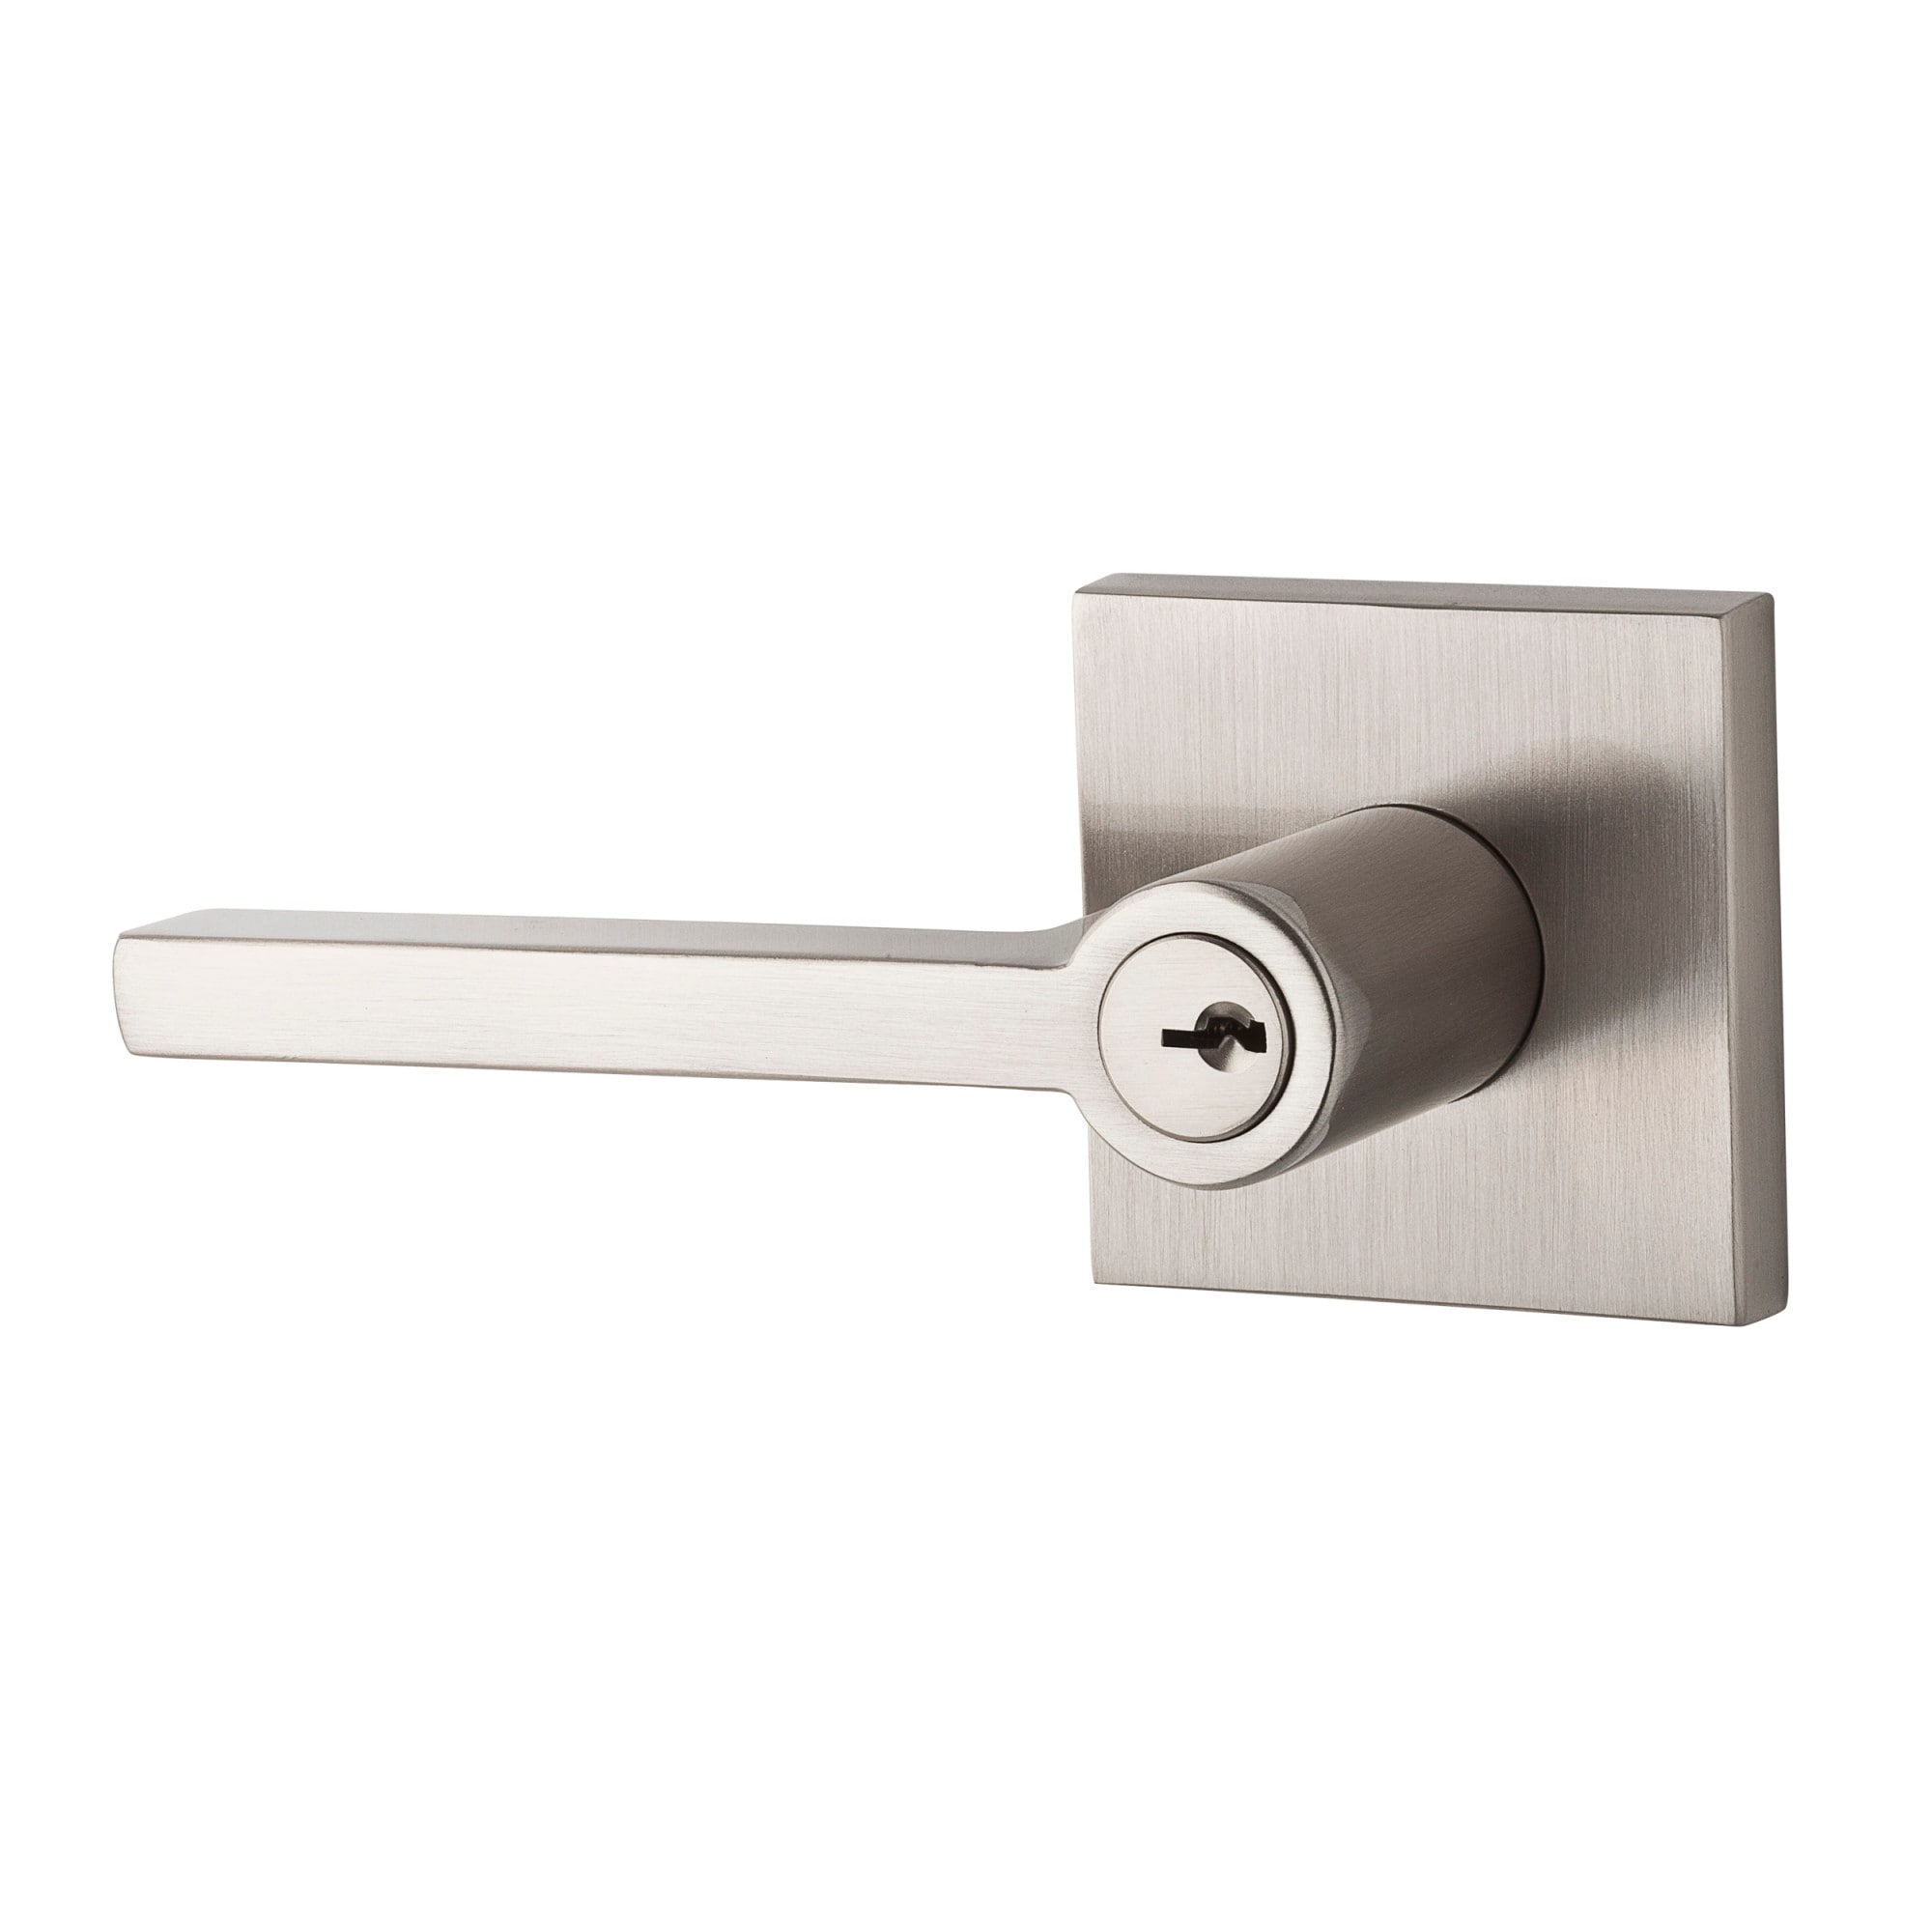 Baldwin Square Single Cylinder Keyed Entry Door Lever Set with Bed Bath   Beyond 16114428